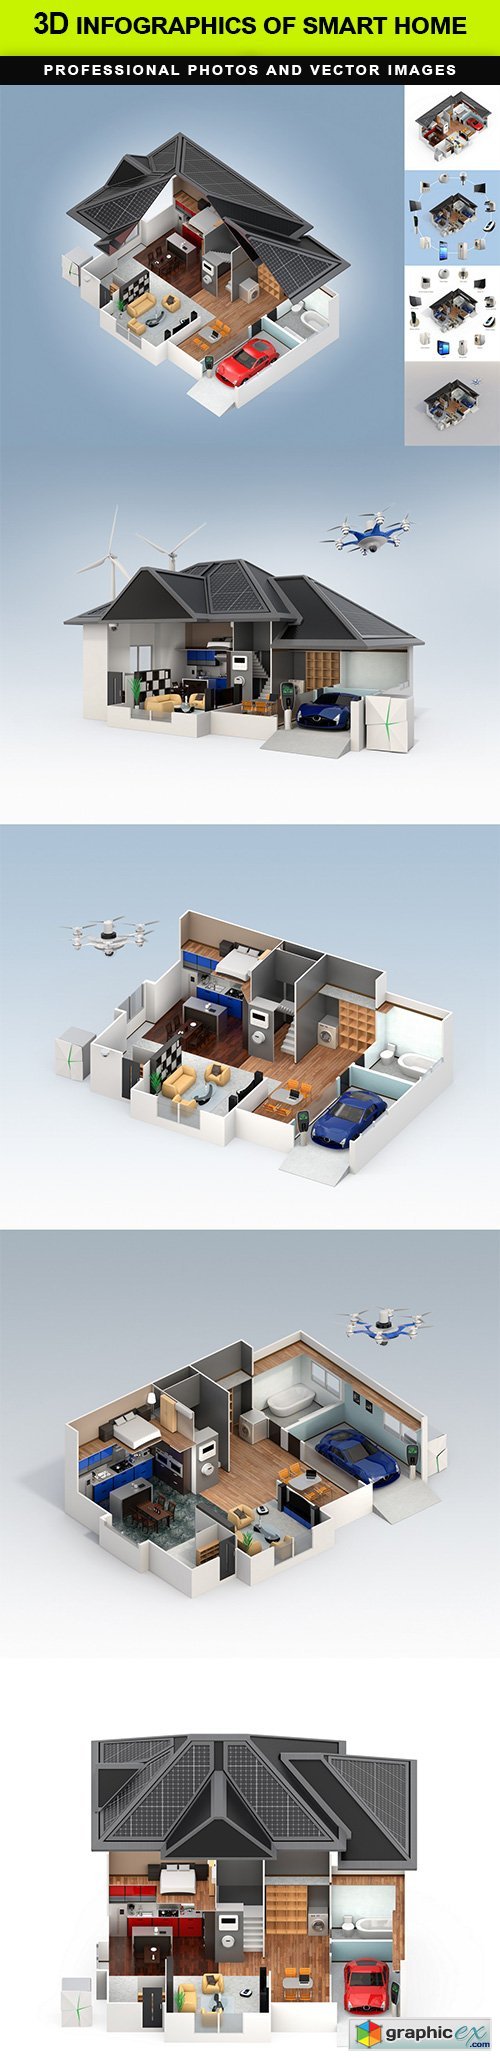 3D infographics of smart home